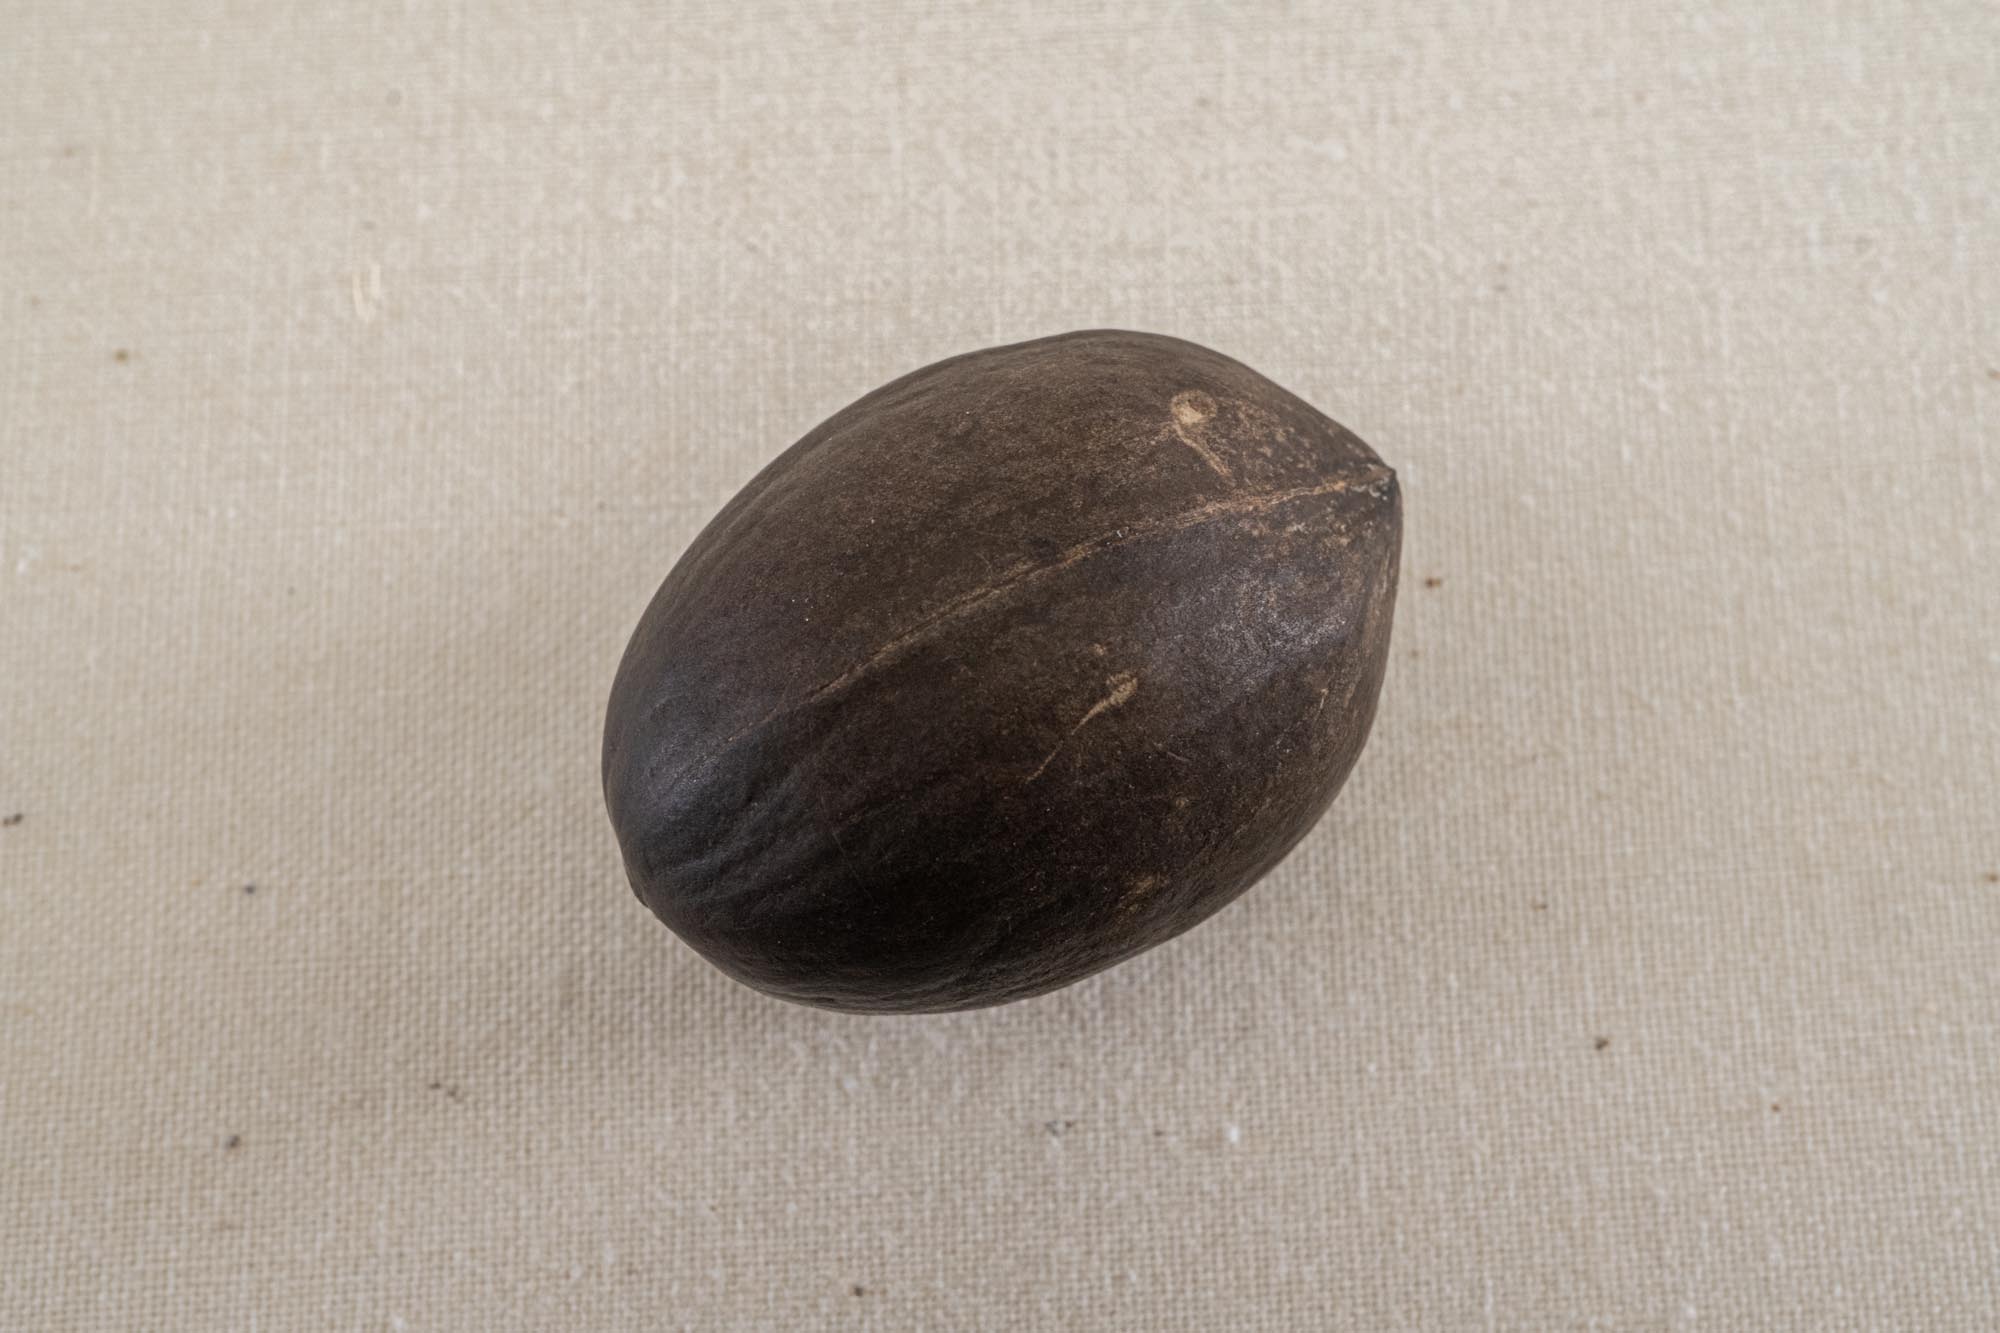 Pecan at the Museum of the Coastal Bend